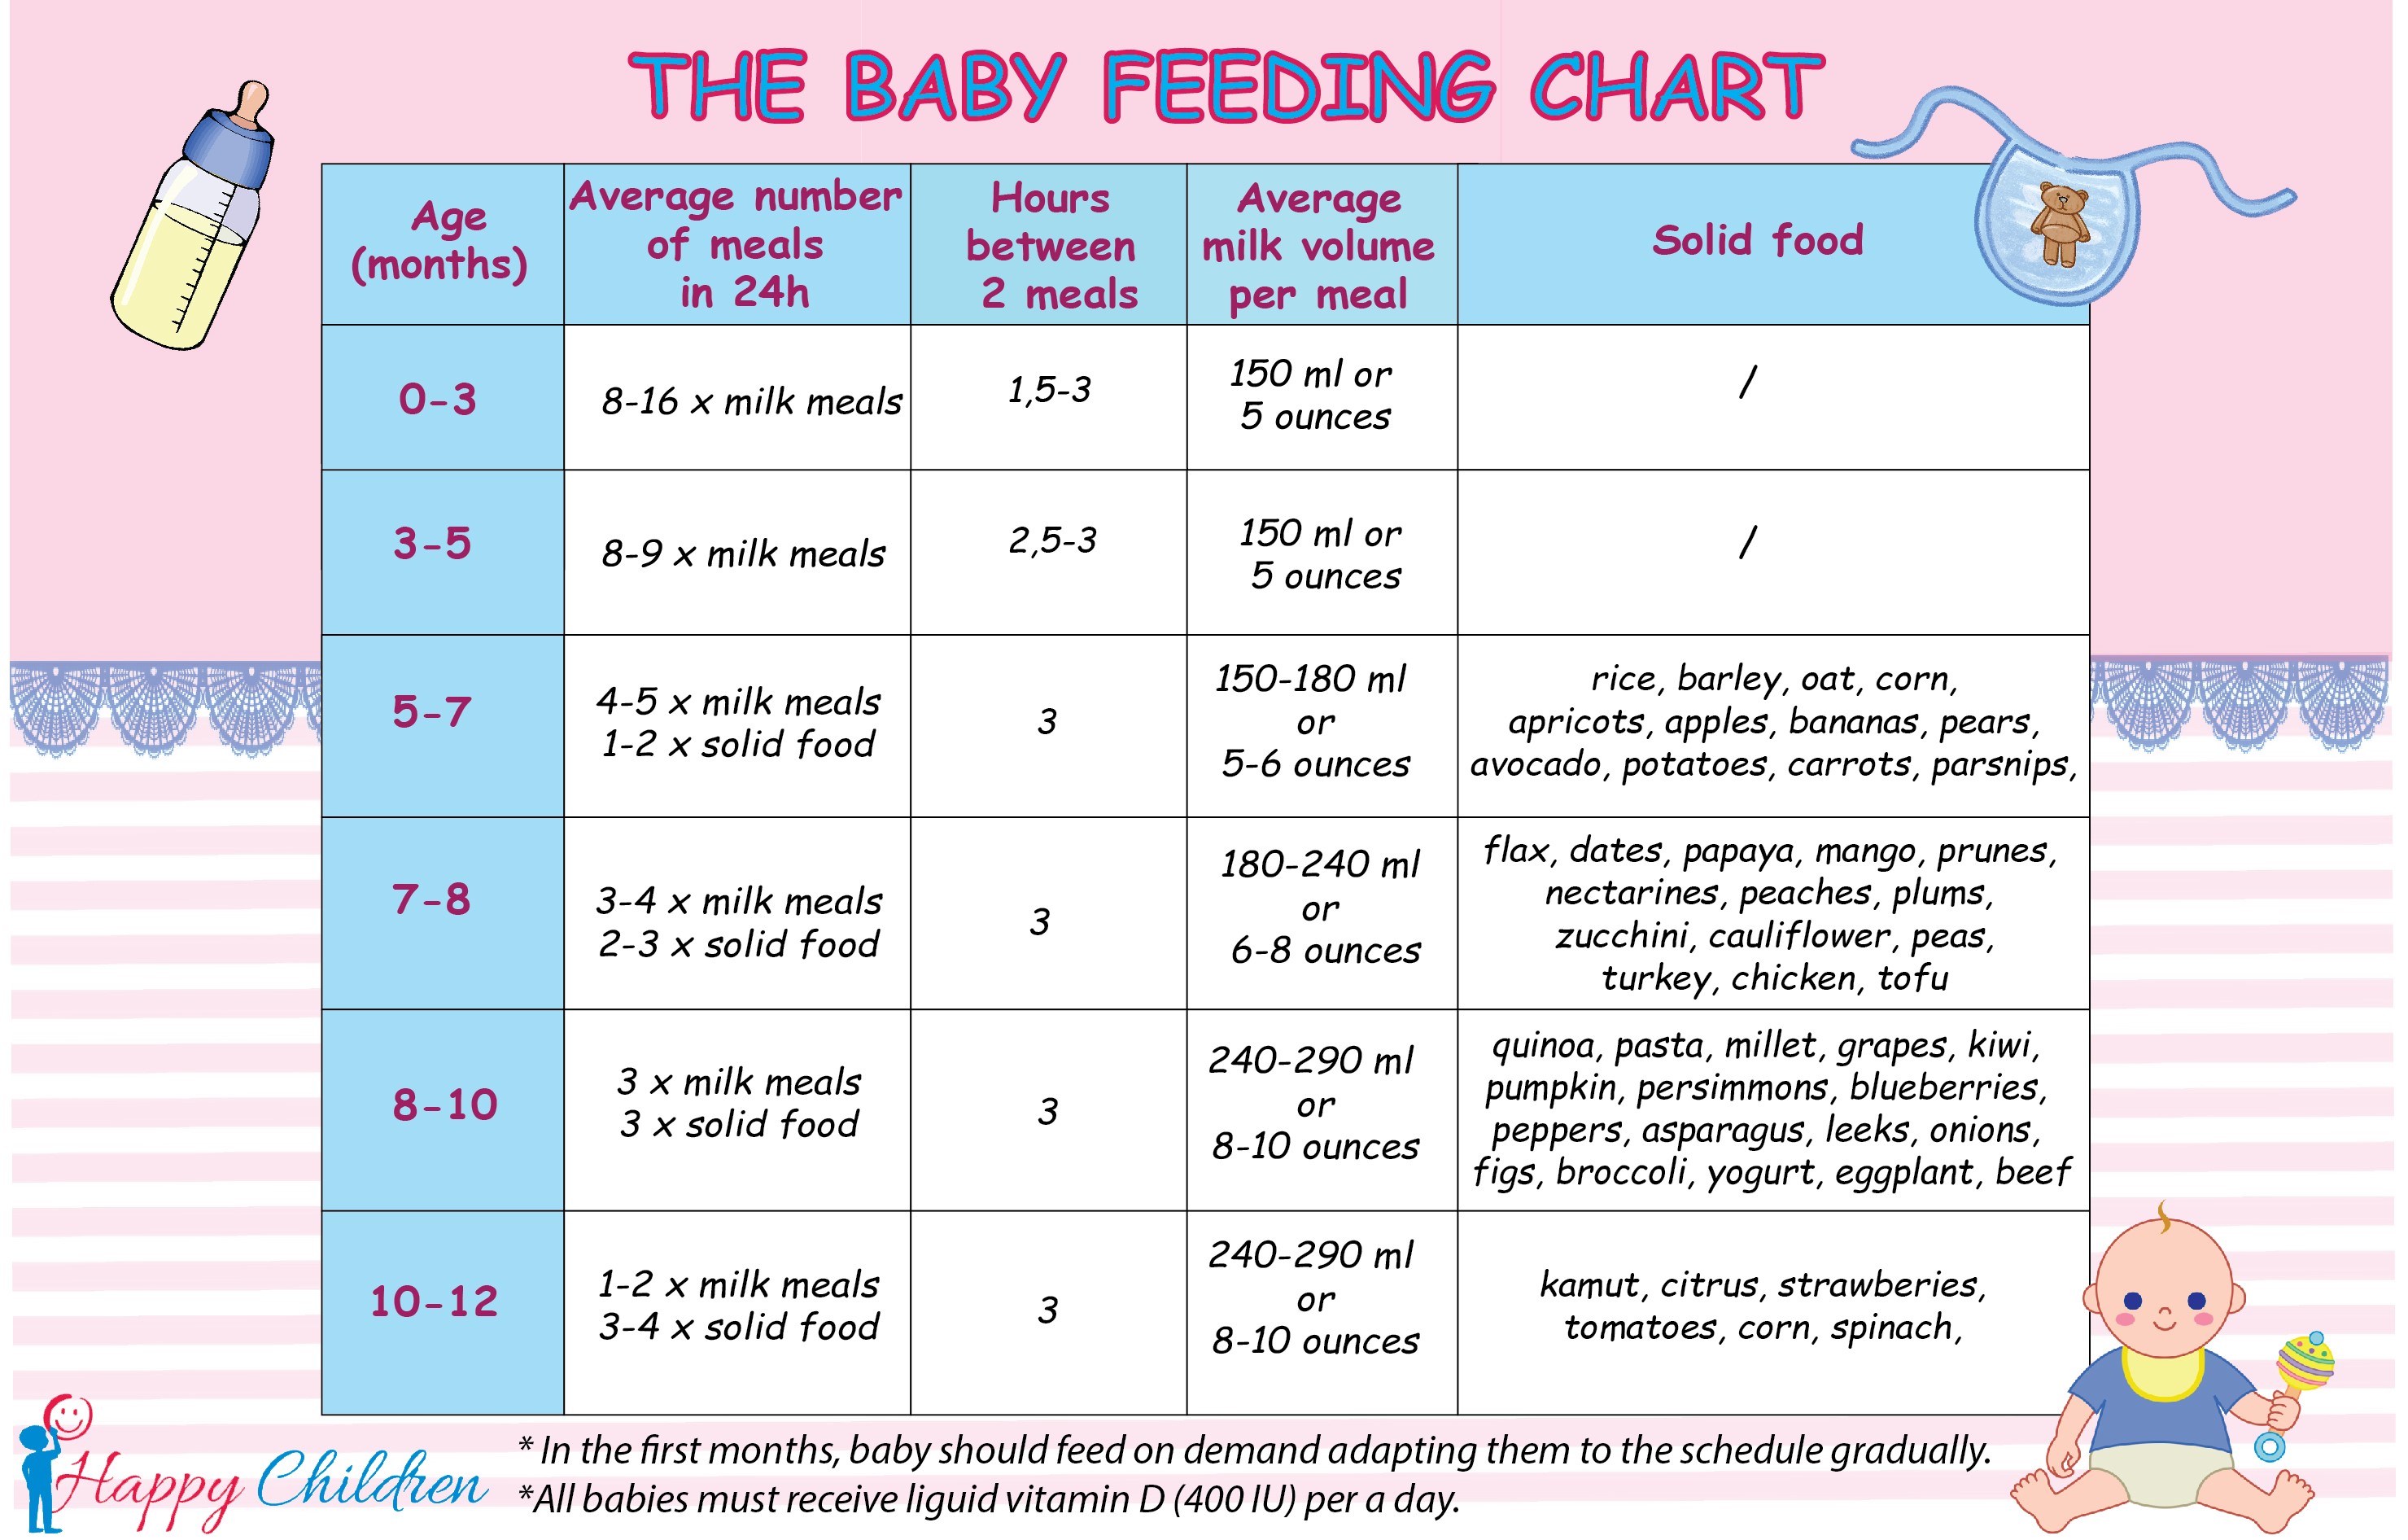 Daily Feeding Chart For Babies